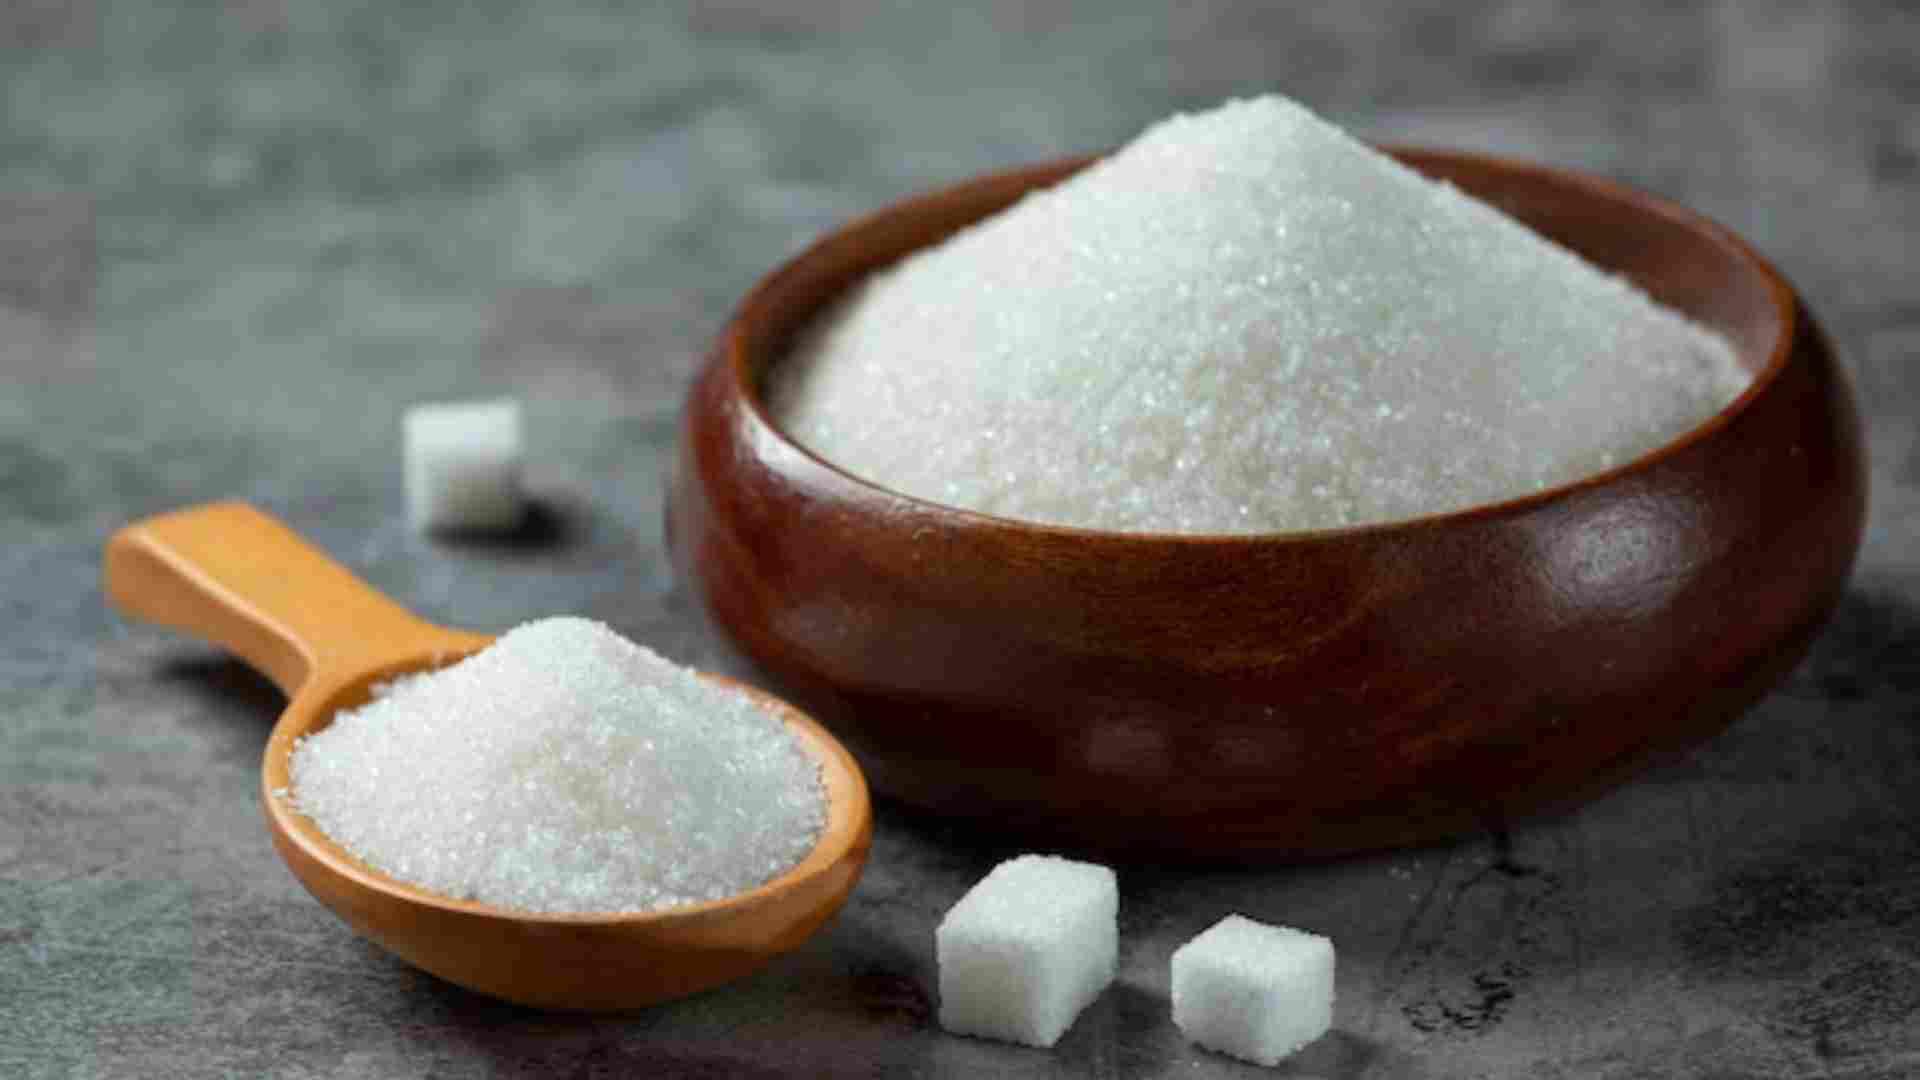 What are the Effects of using low sugar and too much sugar?